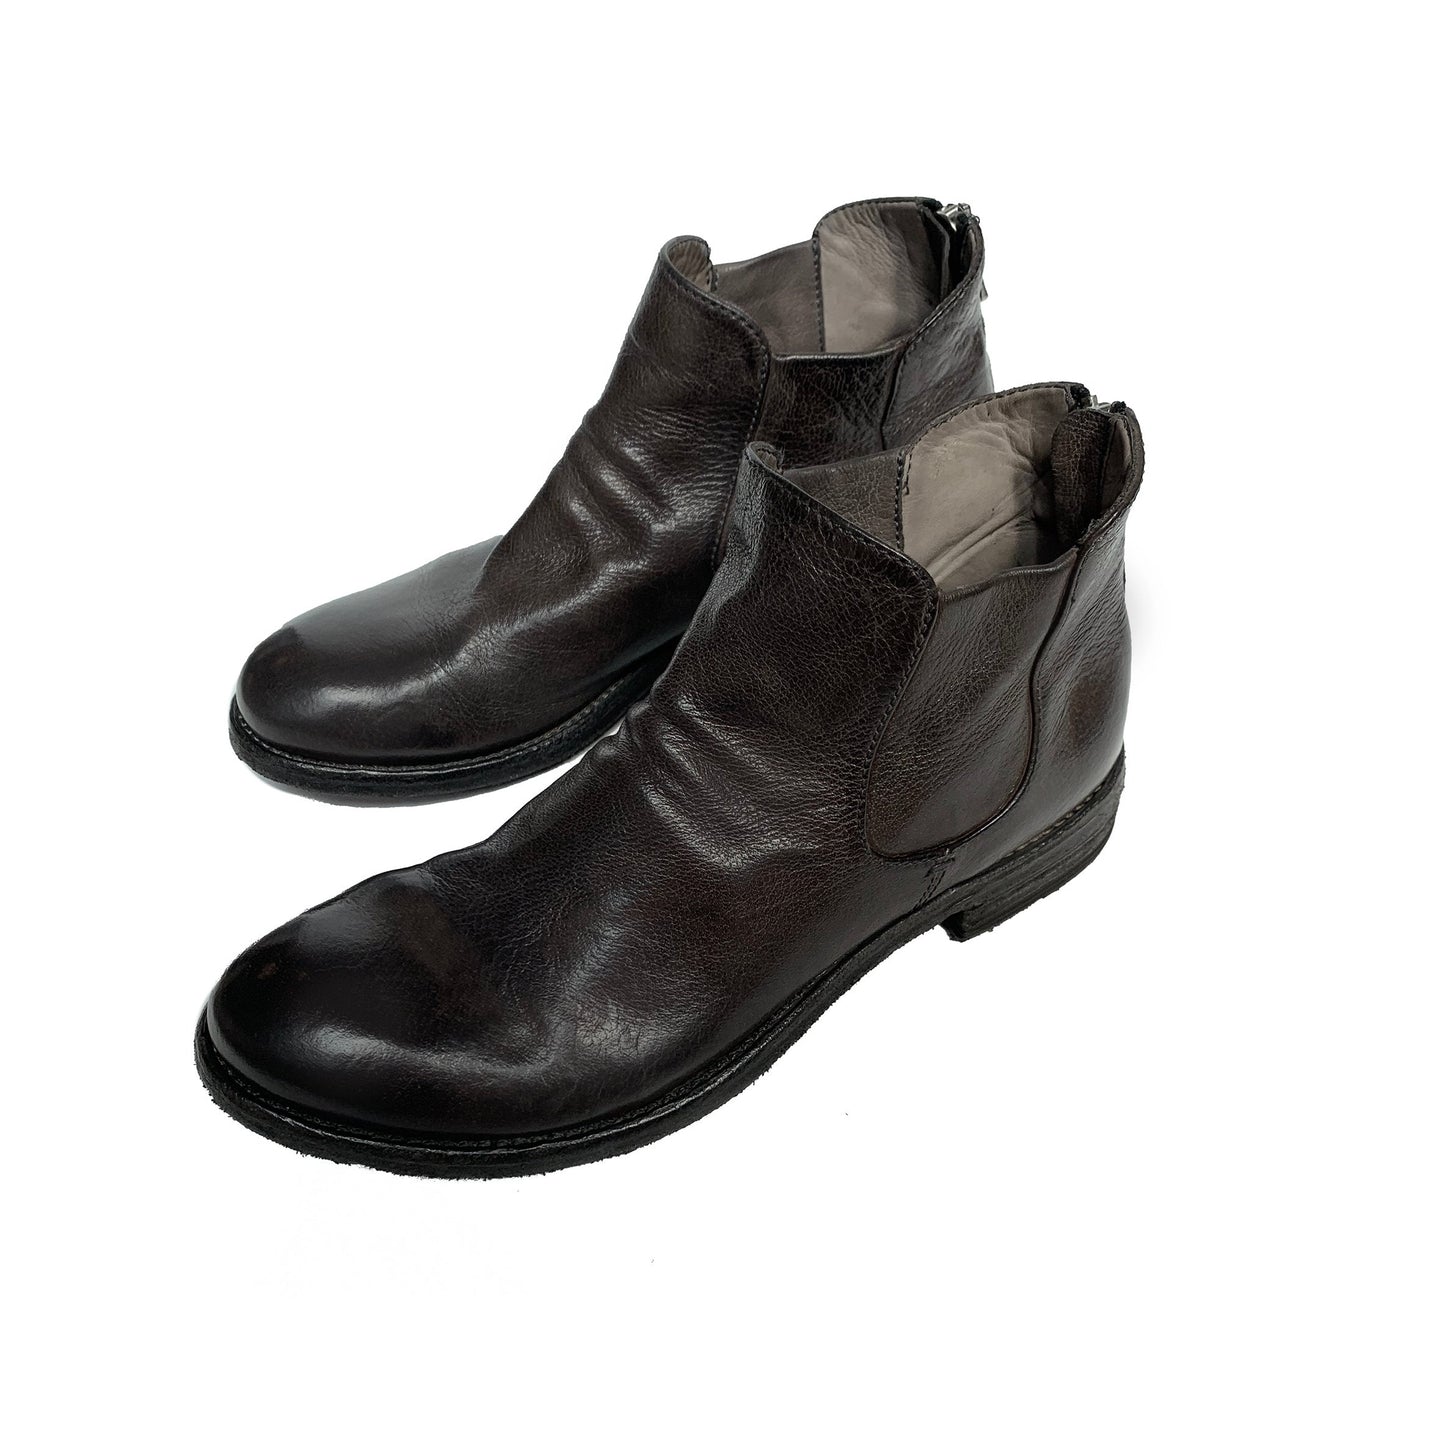 Lexikon 147 Leather Boot in Magnete